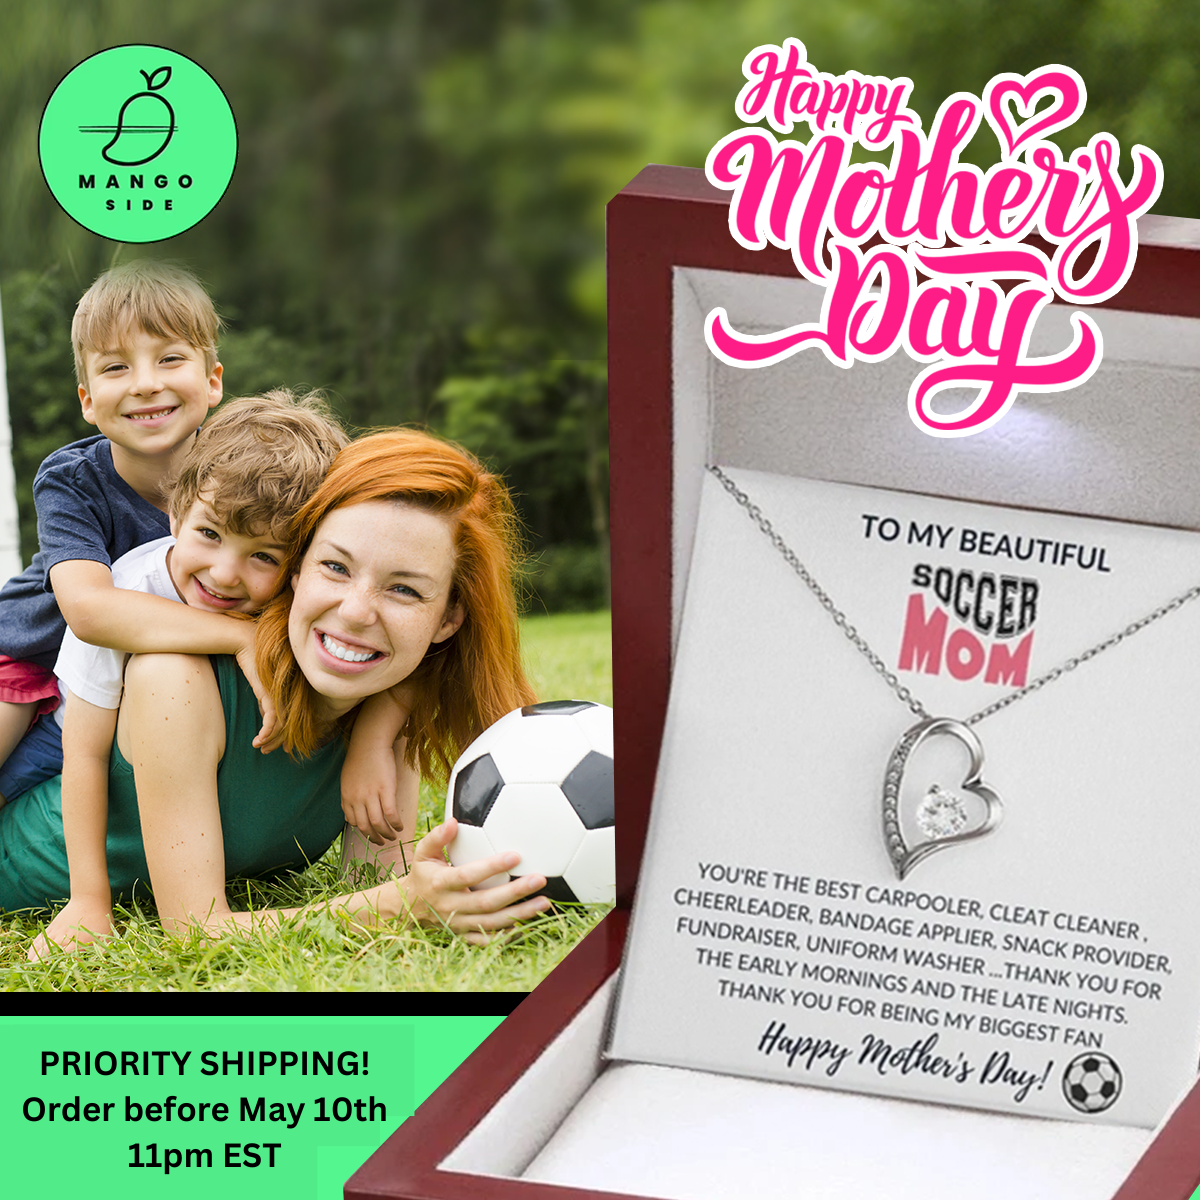 Winning Gift! To my beautiful SOCCER MOM - HAPPY MOTHER'S DAY - Heart Necklace